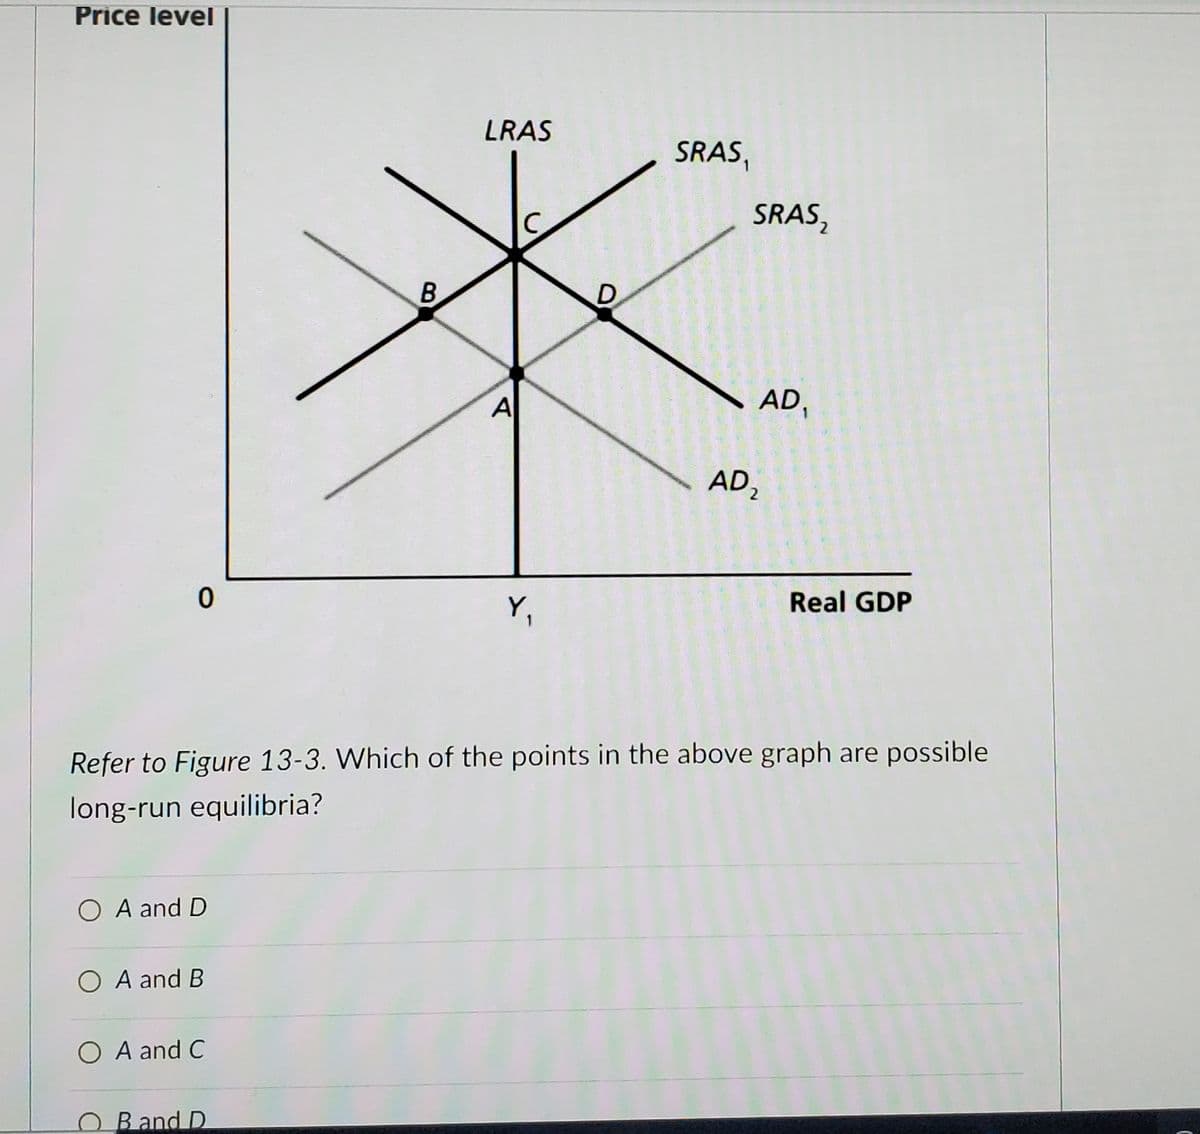 Price level
LRAS
SRAS,
SRAS,
B
D.
A
AD,
1
AD,
Y,
Real GDP
Refer to Figure 13-3. Which of the points in the above graph are possible
long-run equilibria?
O A and D
O A and B
O A and C
O Band D
